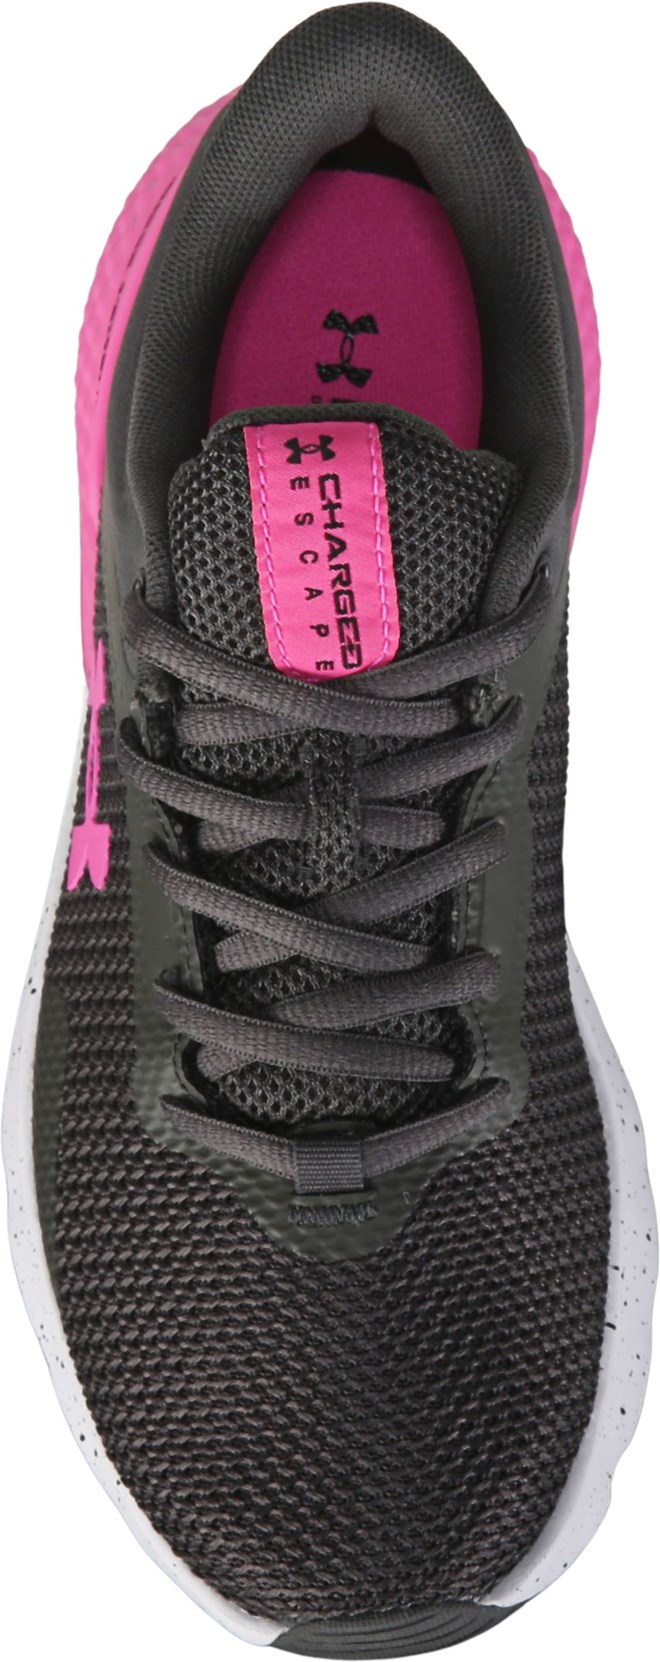 Under Armour Charged Escape 2 Women's Running Shoes